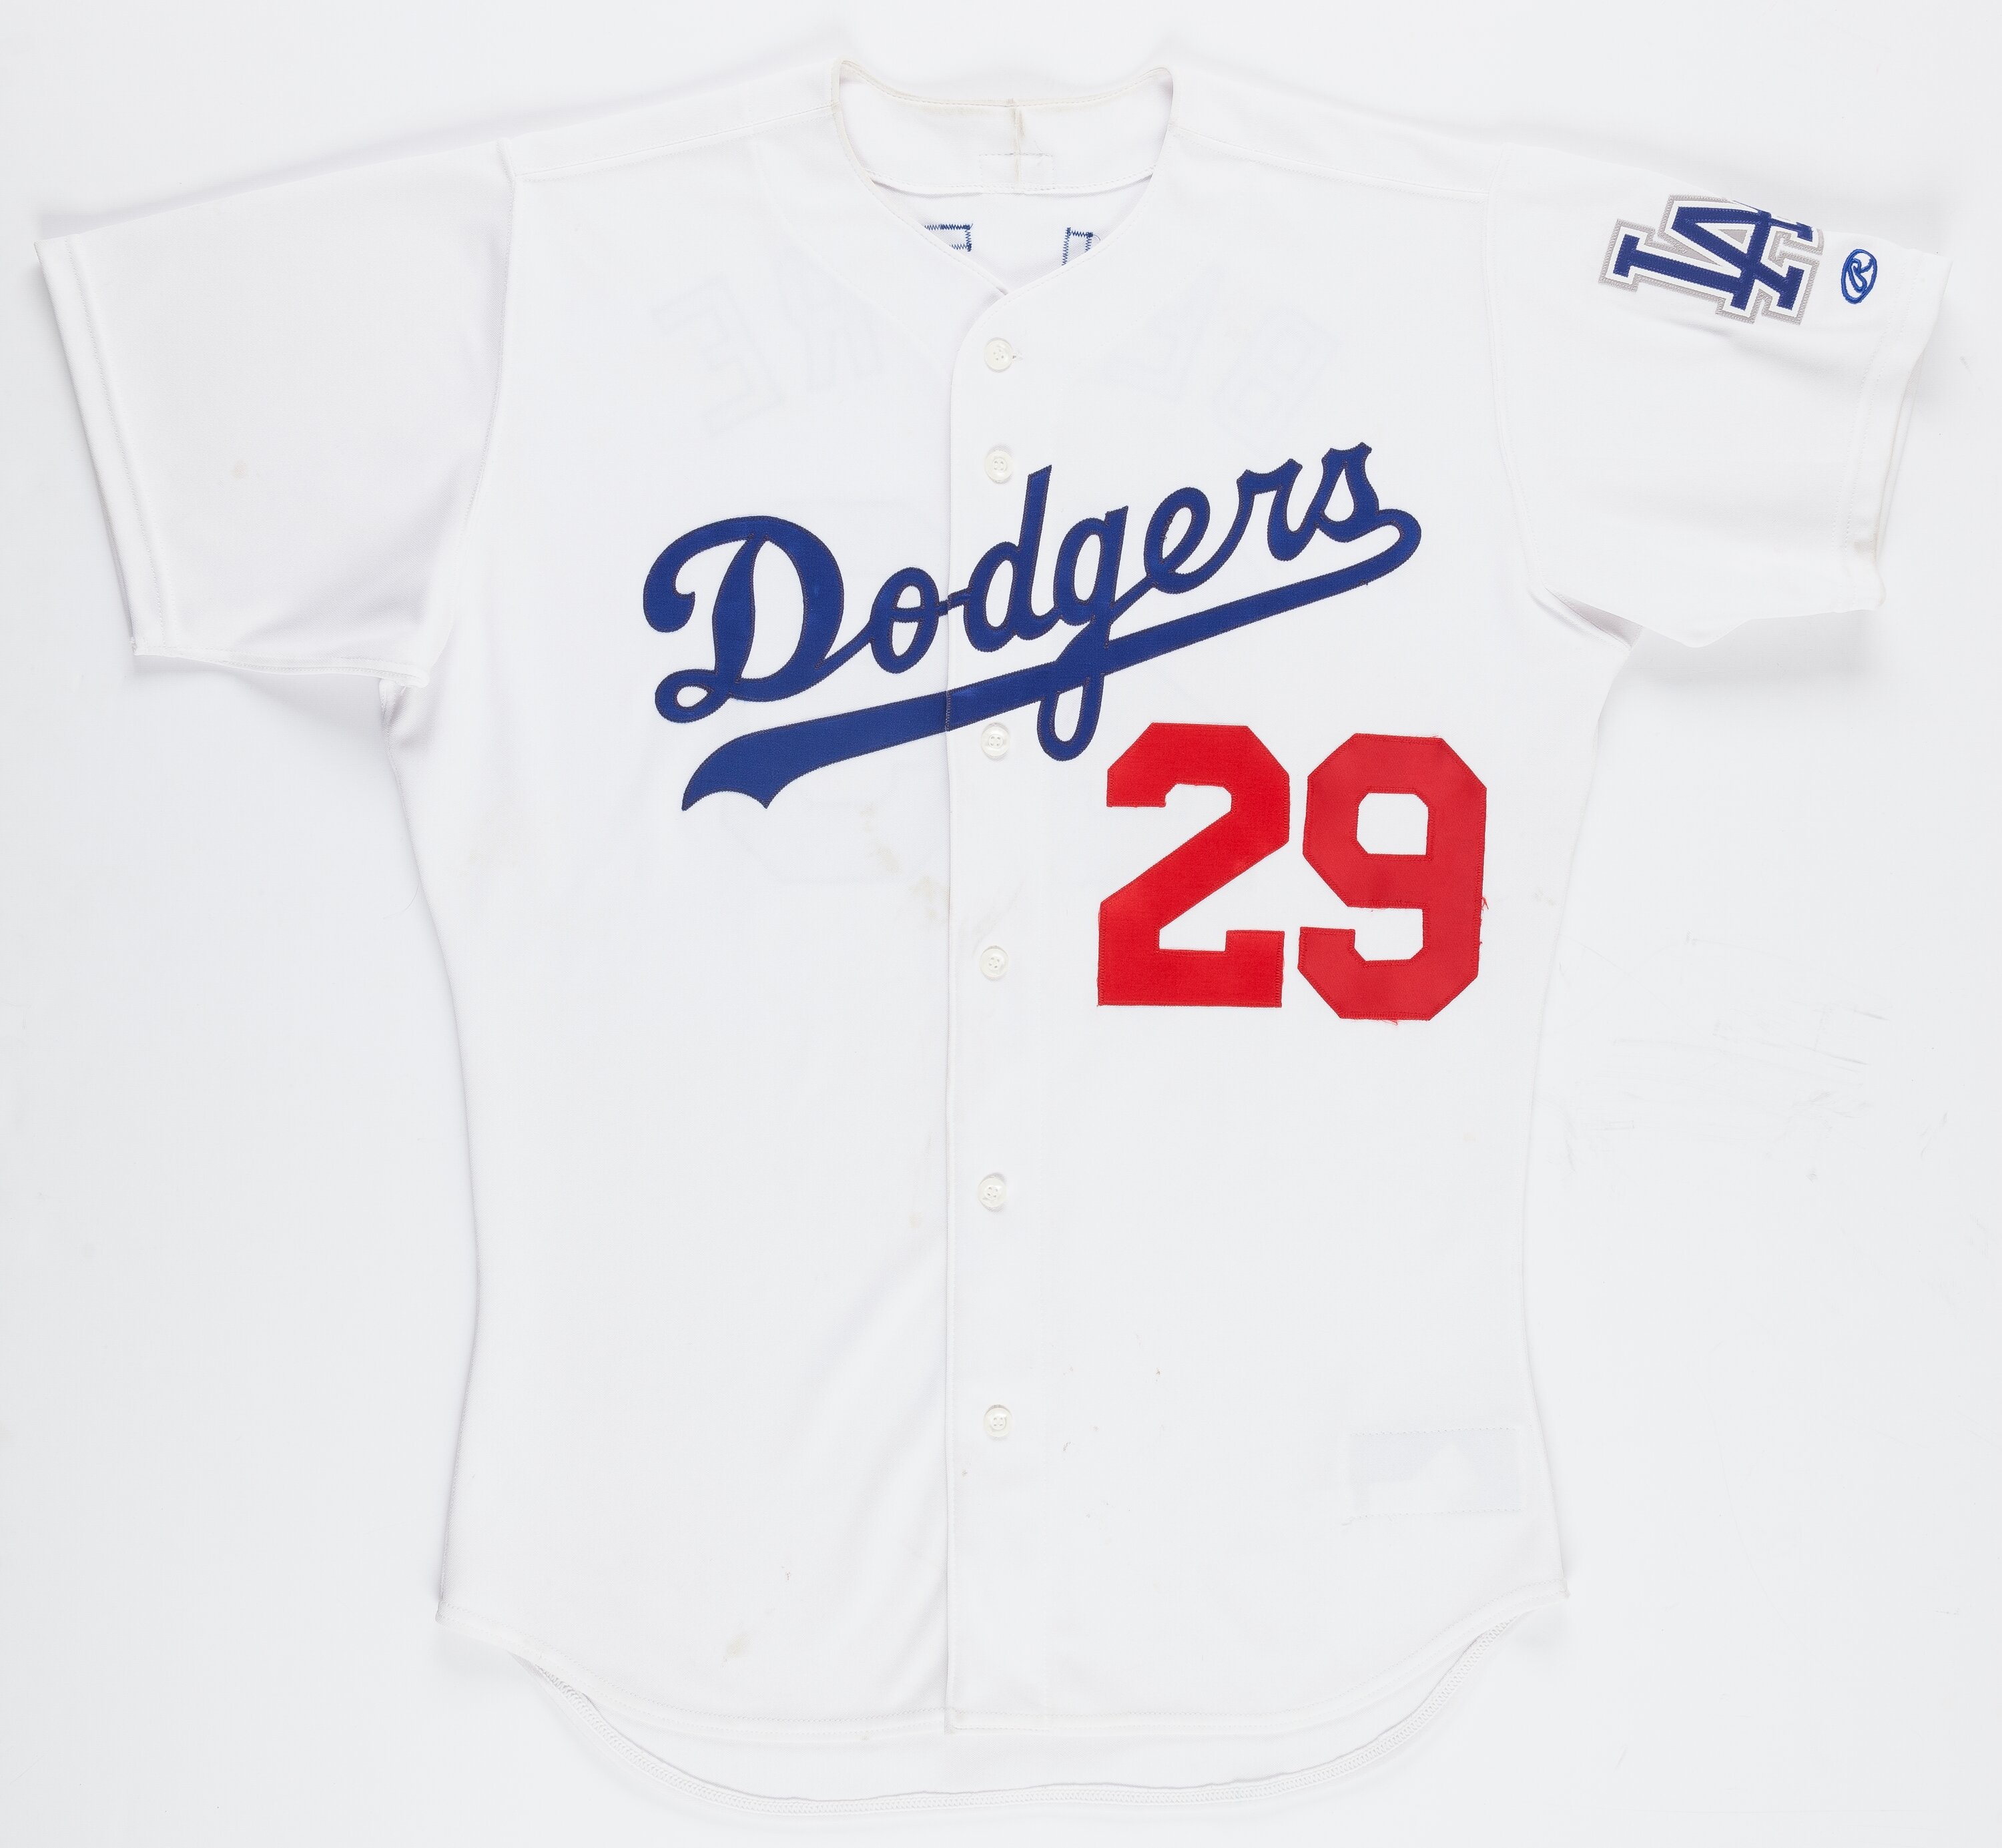 Adrian Beltre Jersey - Los Angeles Dodgers 1999 MLB Throwback Away Jersey